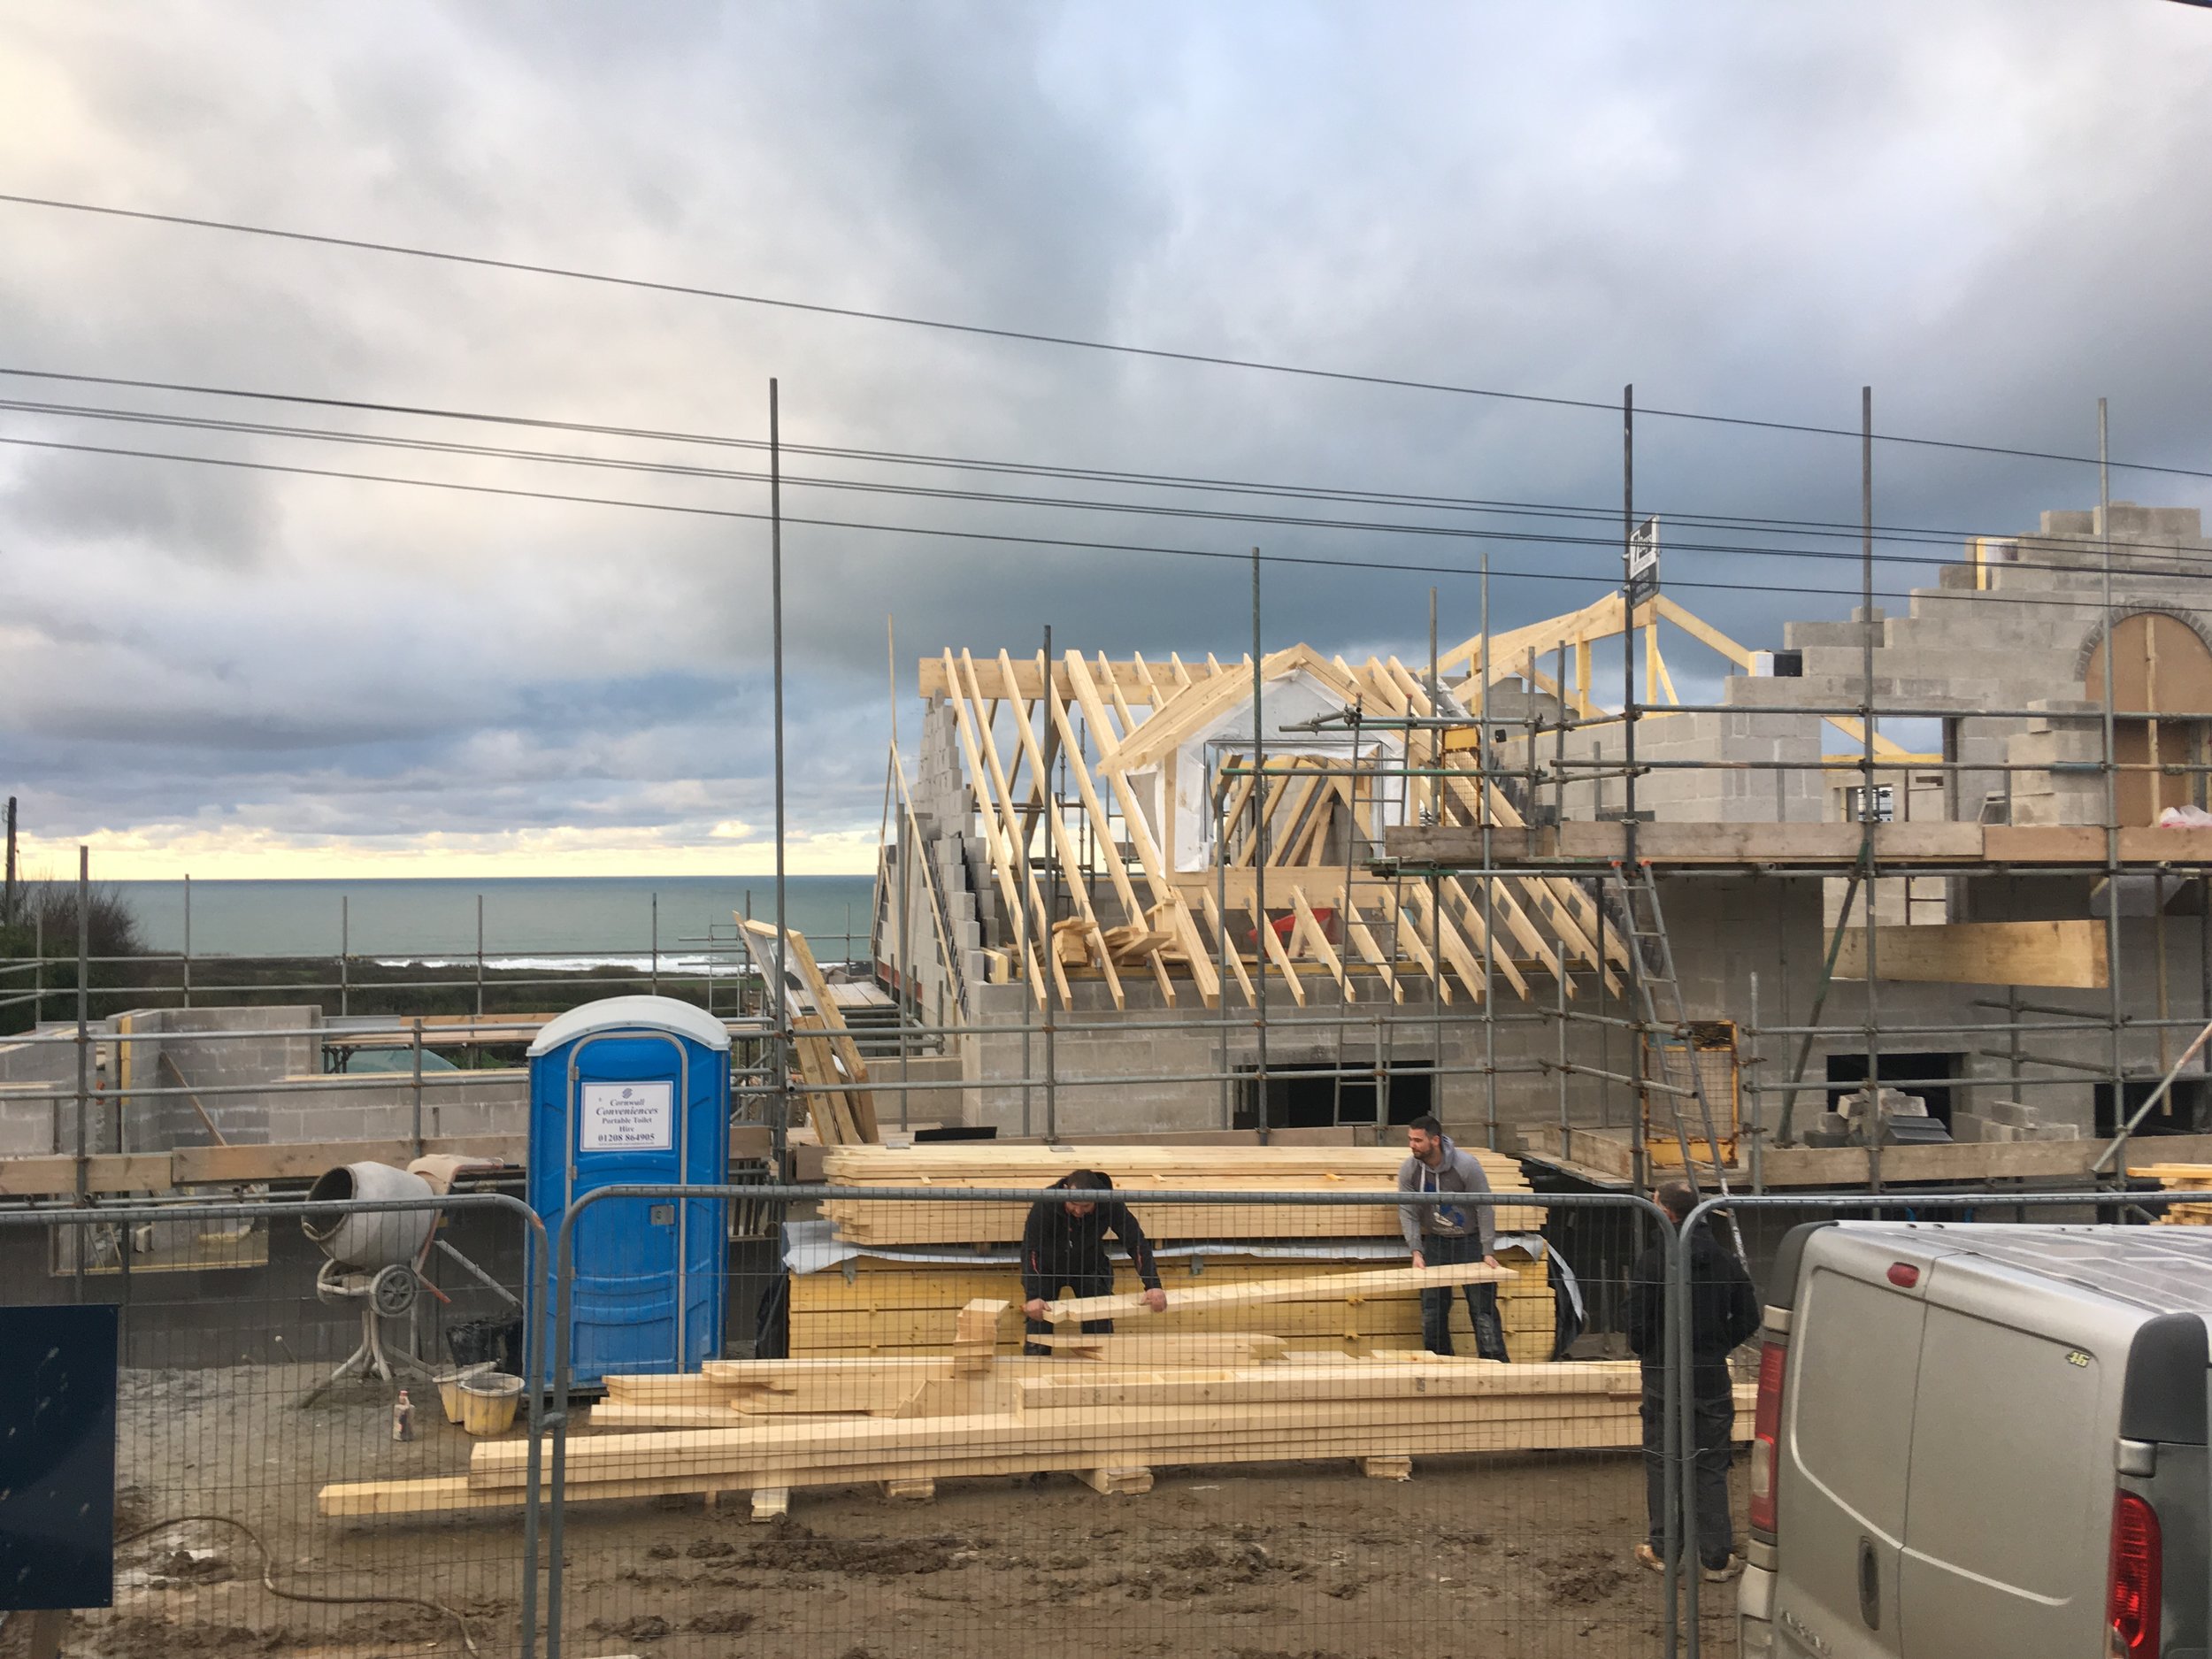 Roofing begins (March 8th 2019)